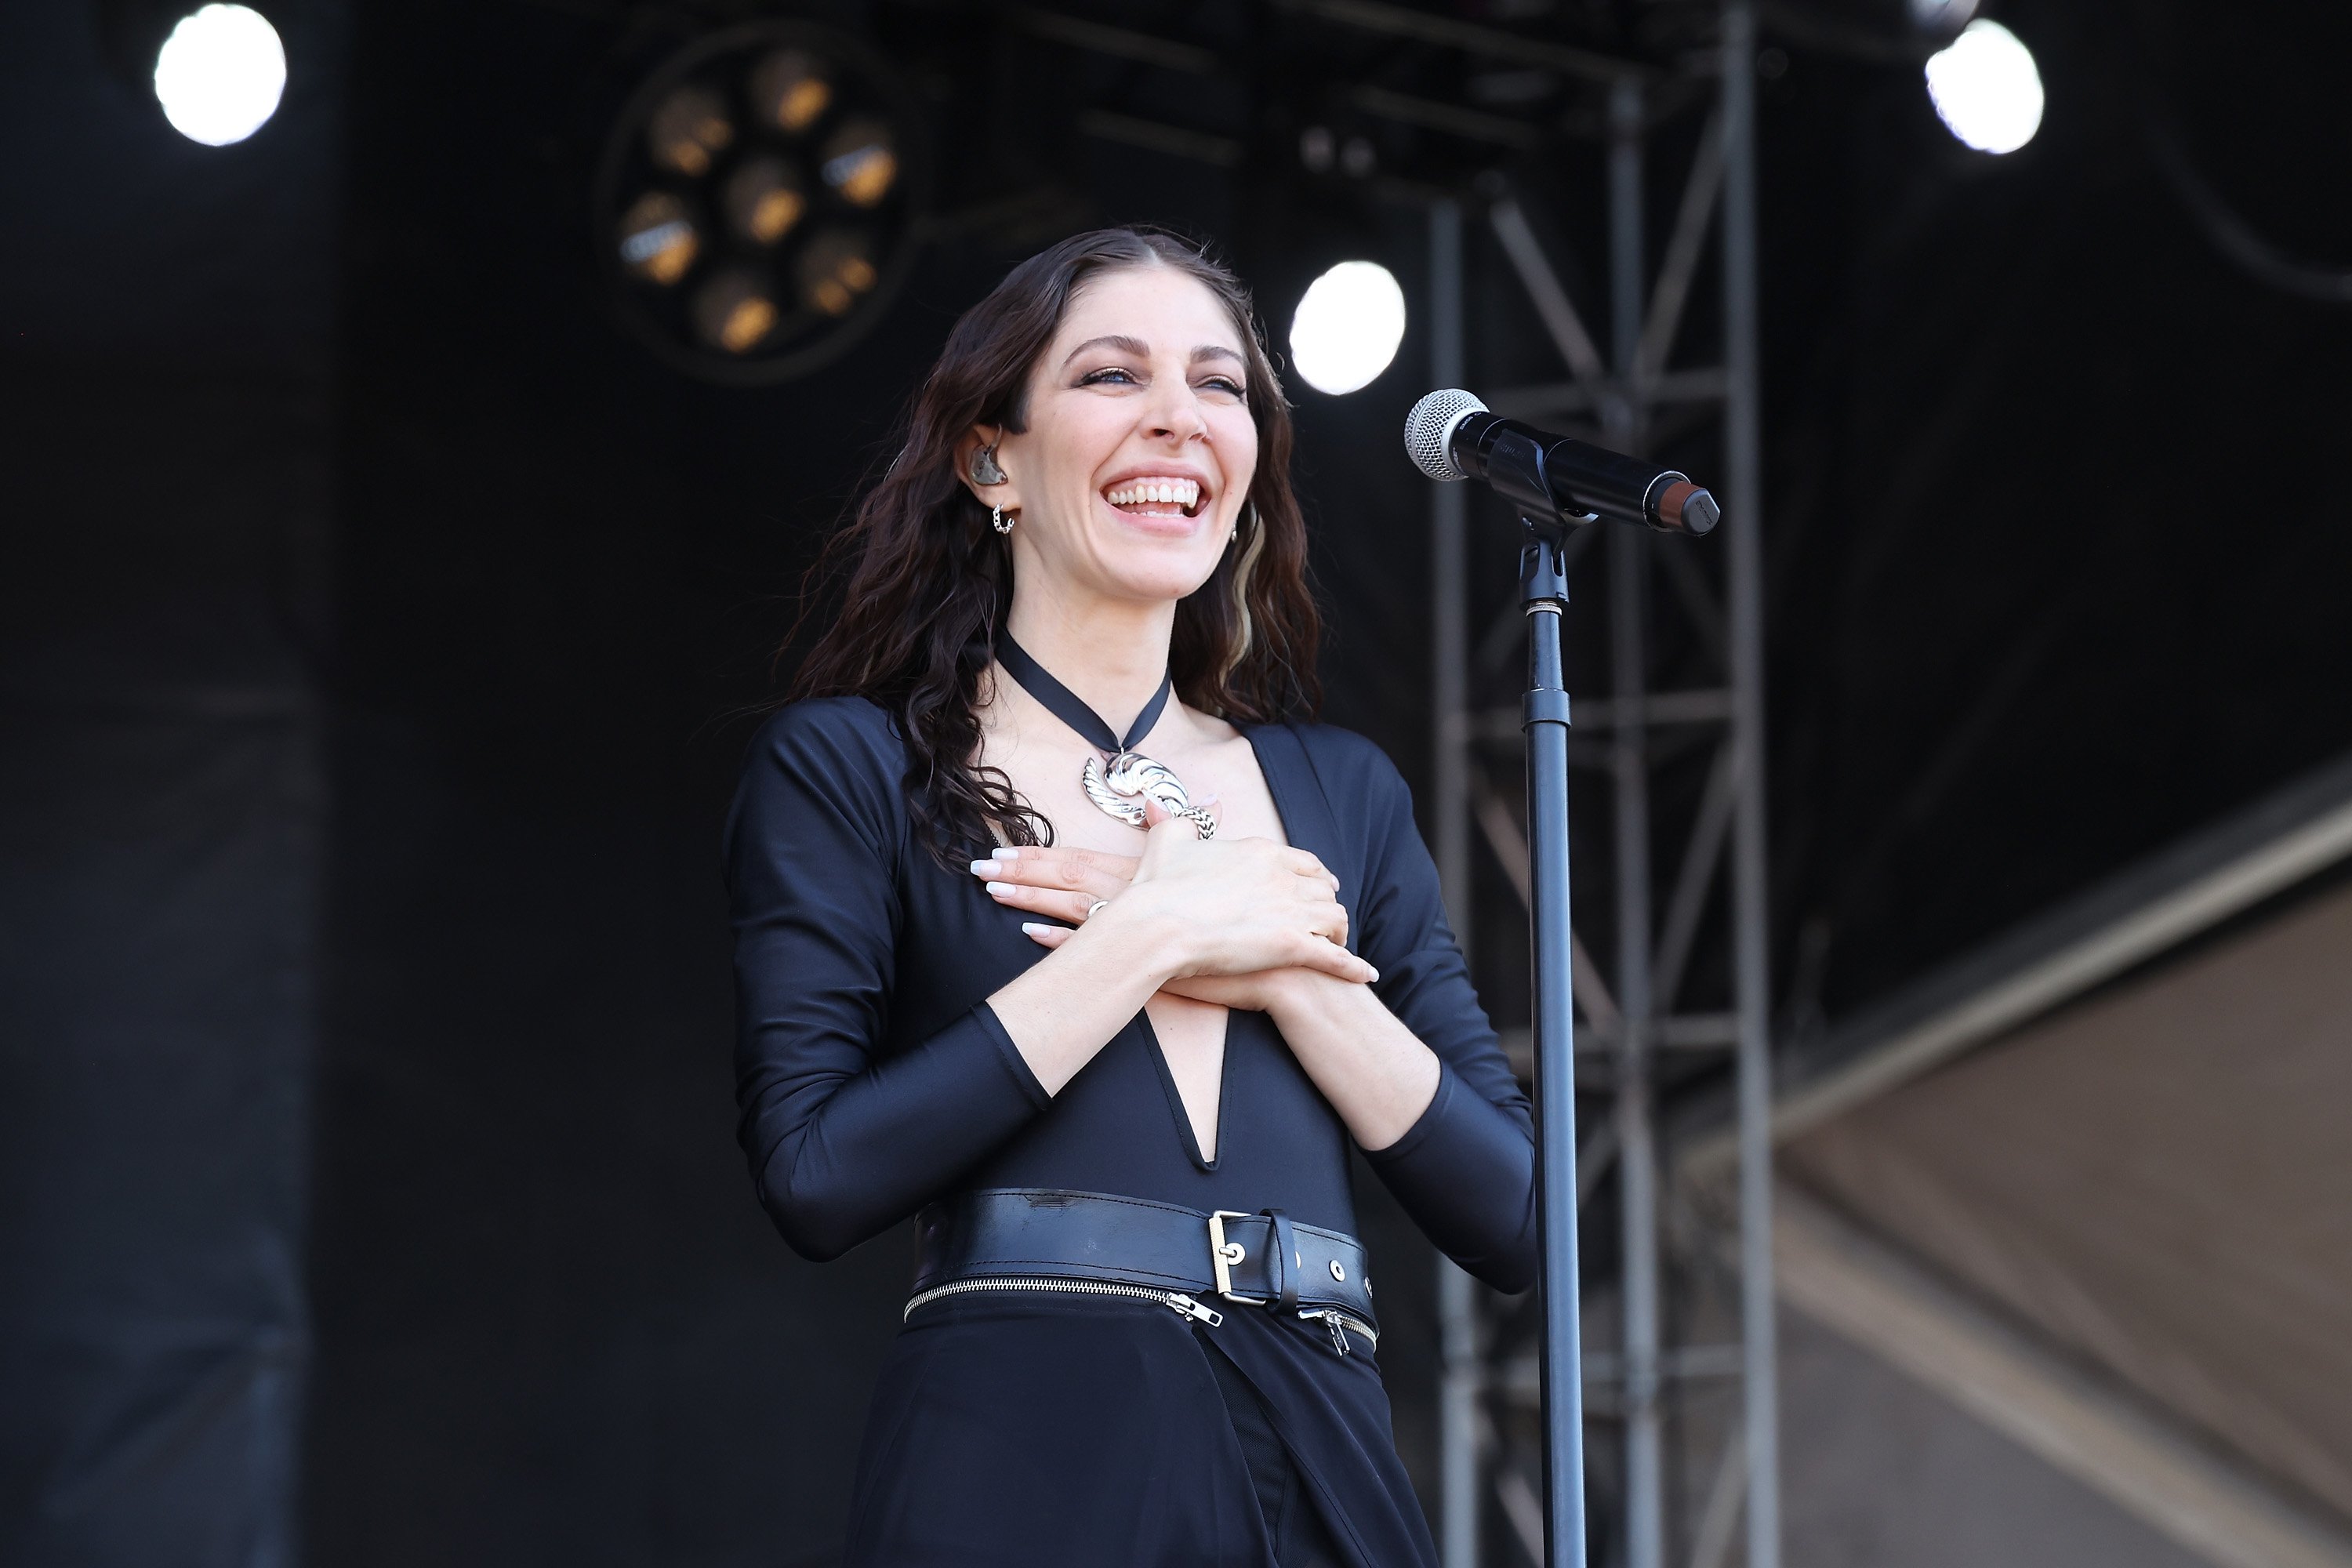 Caroline Polachek performs during the 2021 Governors Ball Music Festival